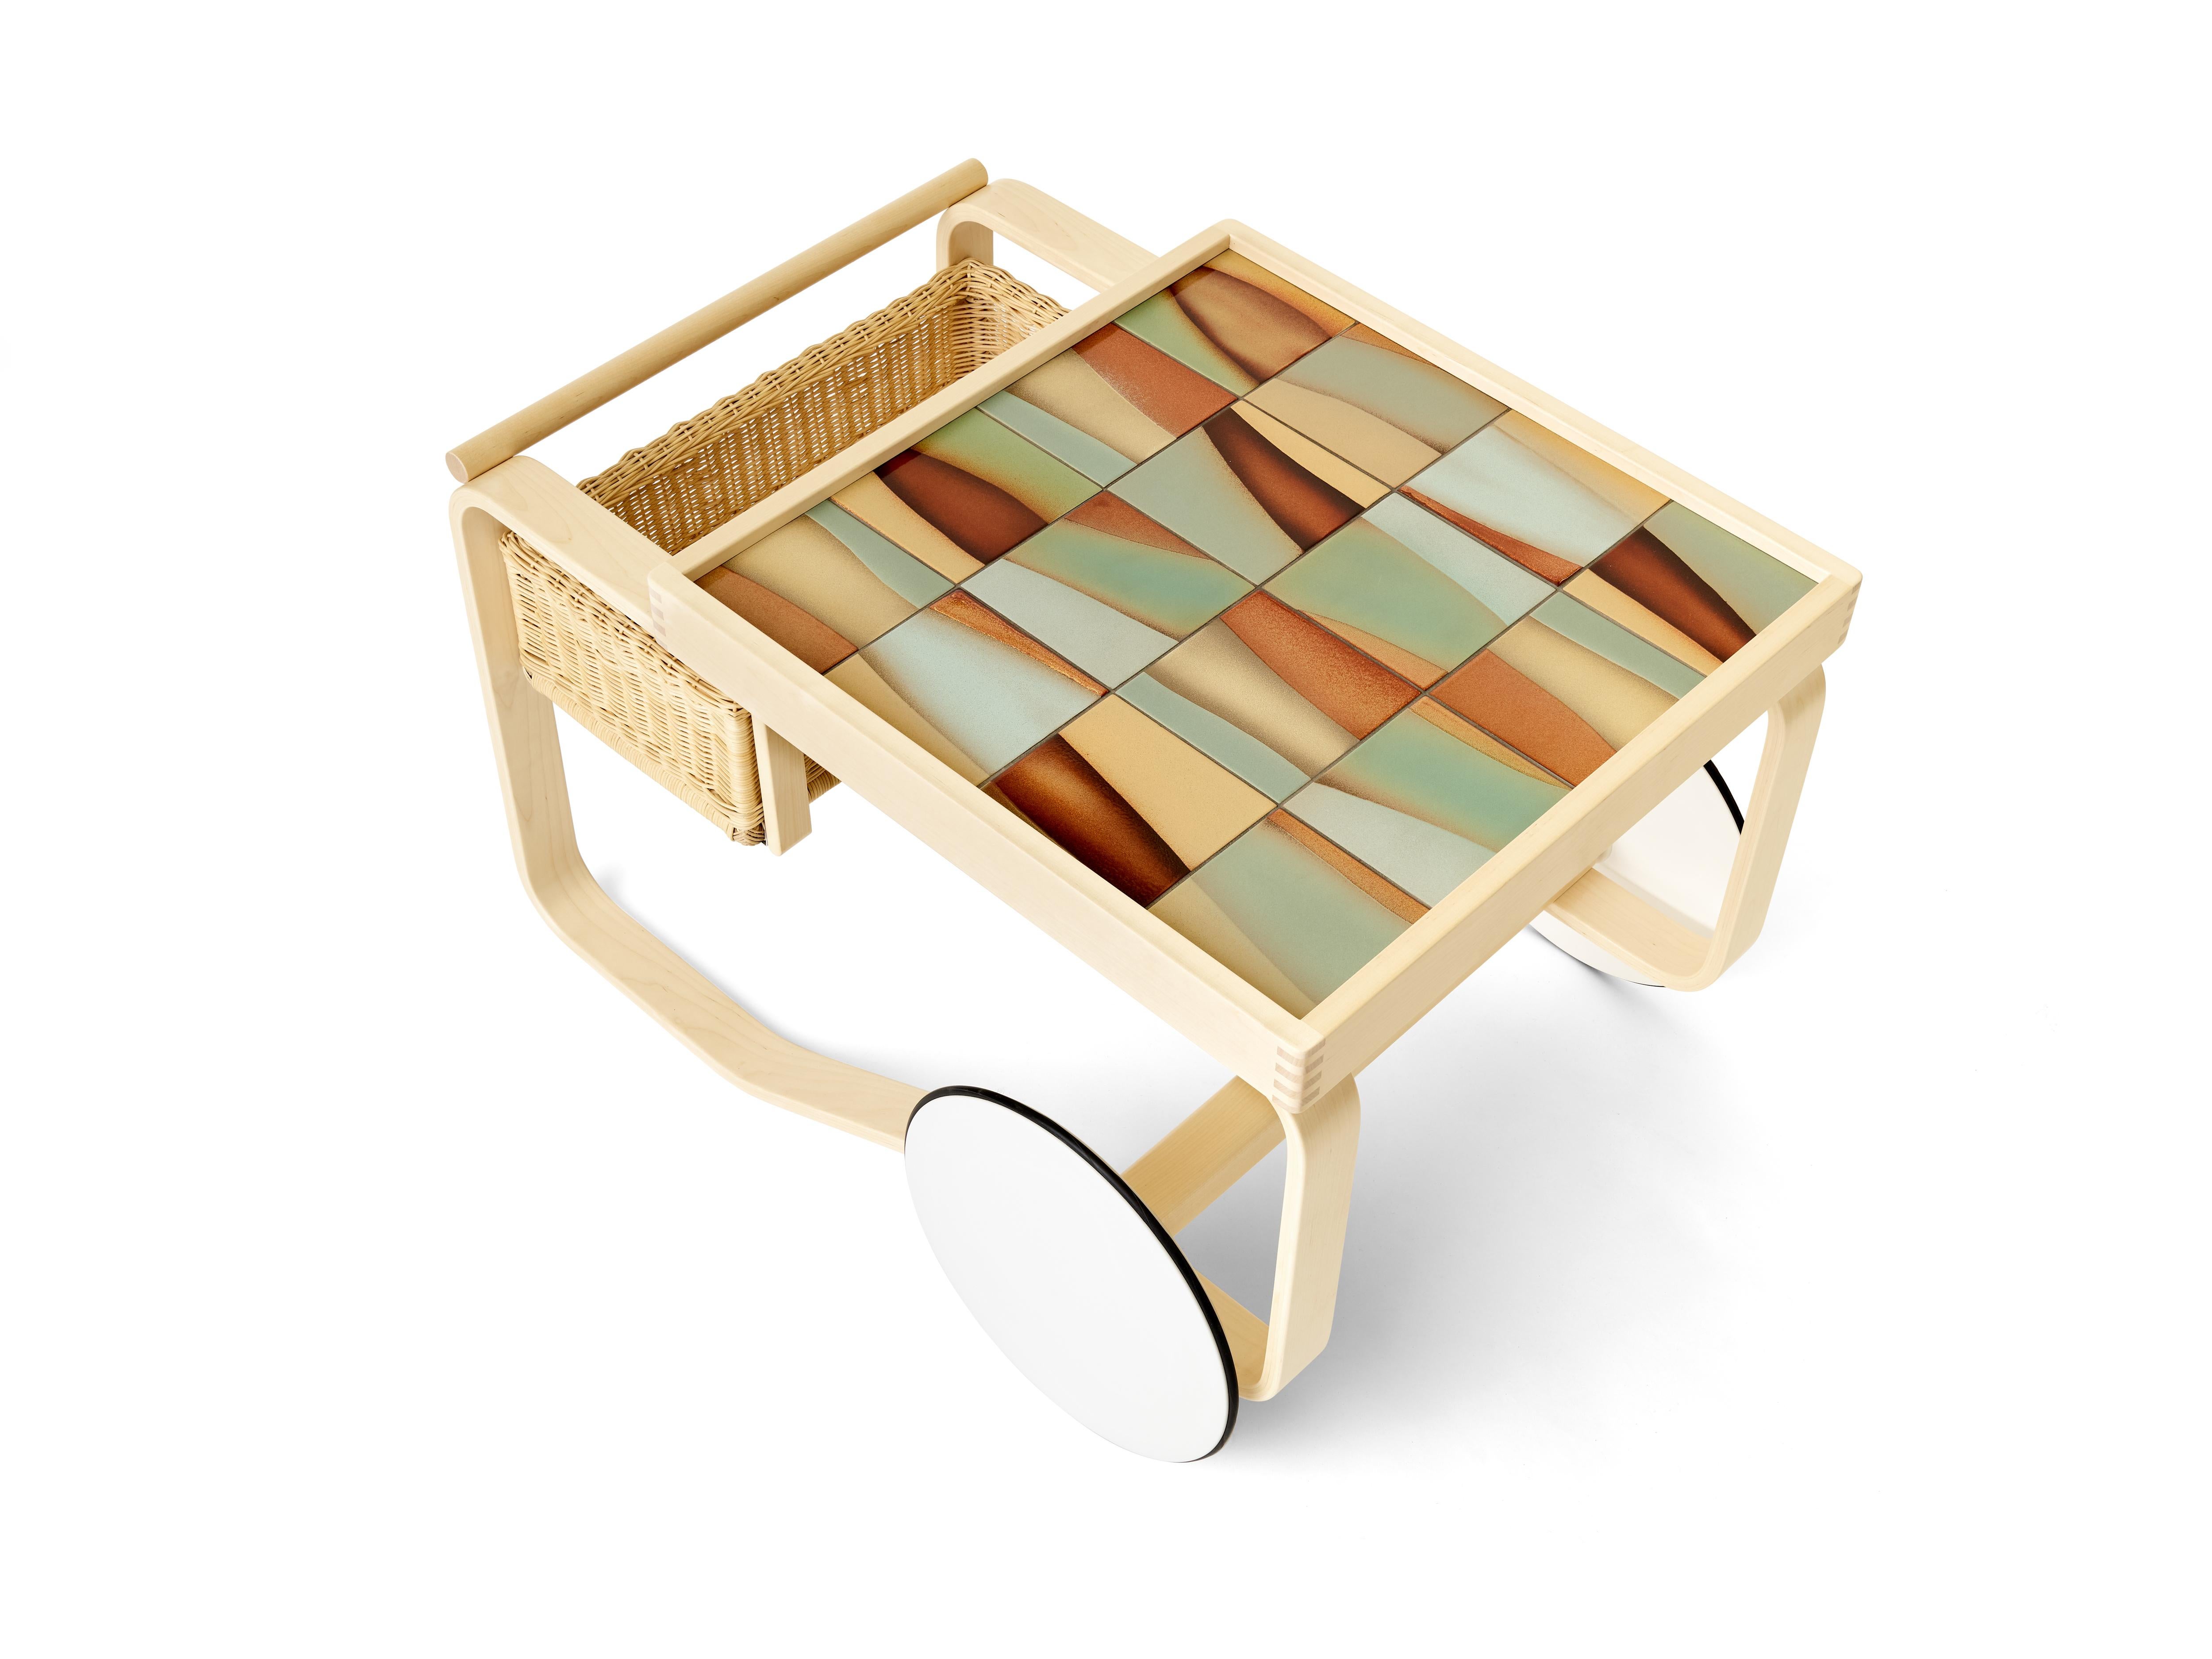 As an edition of six designs with only six of each made, Artek's iconic Tea Trolley is inlaid with Heath tile in “Landscape,” inspired by vintage tile installations found around their Sausalito factory and invoking a hilly Western landscape.